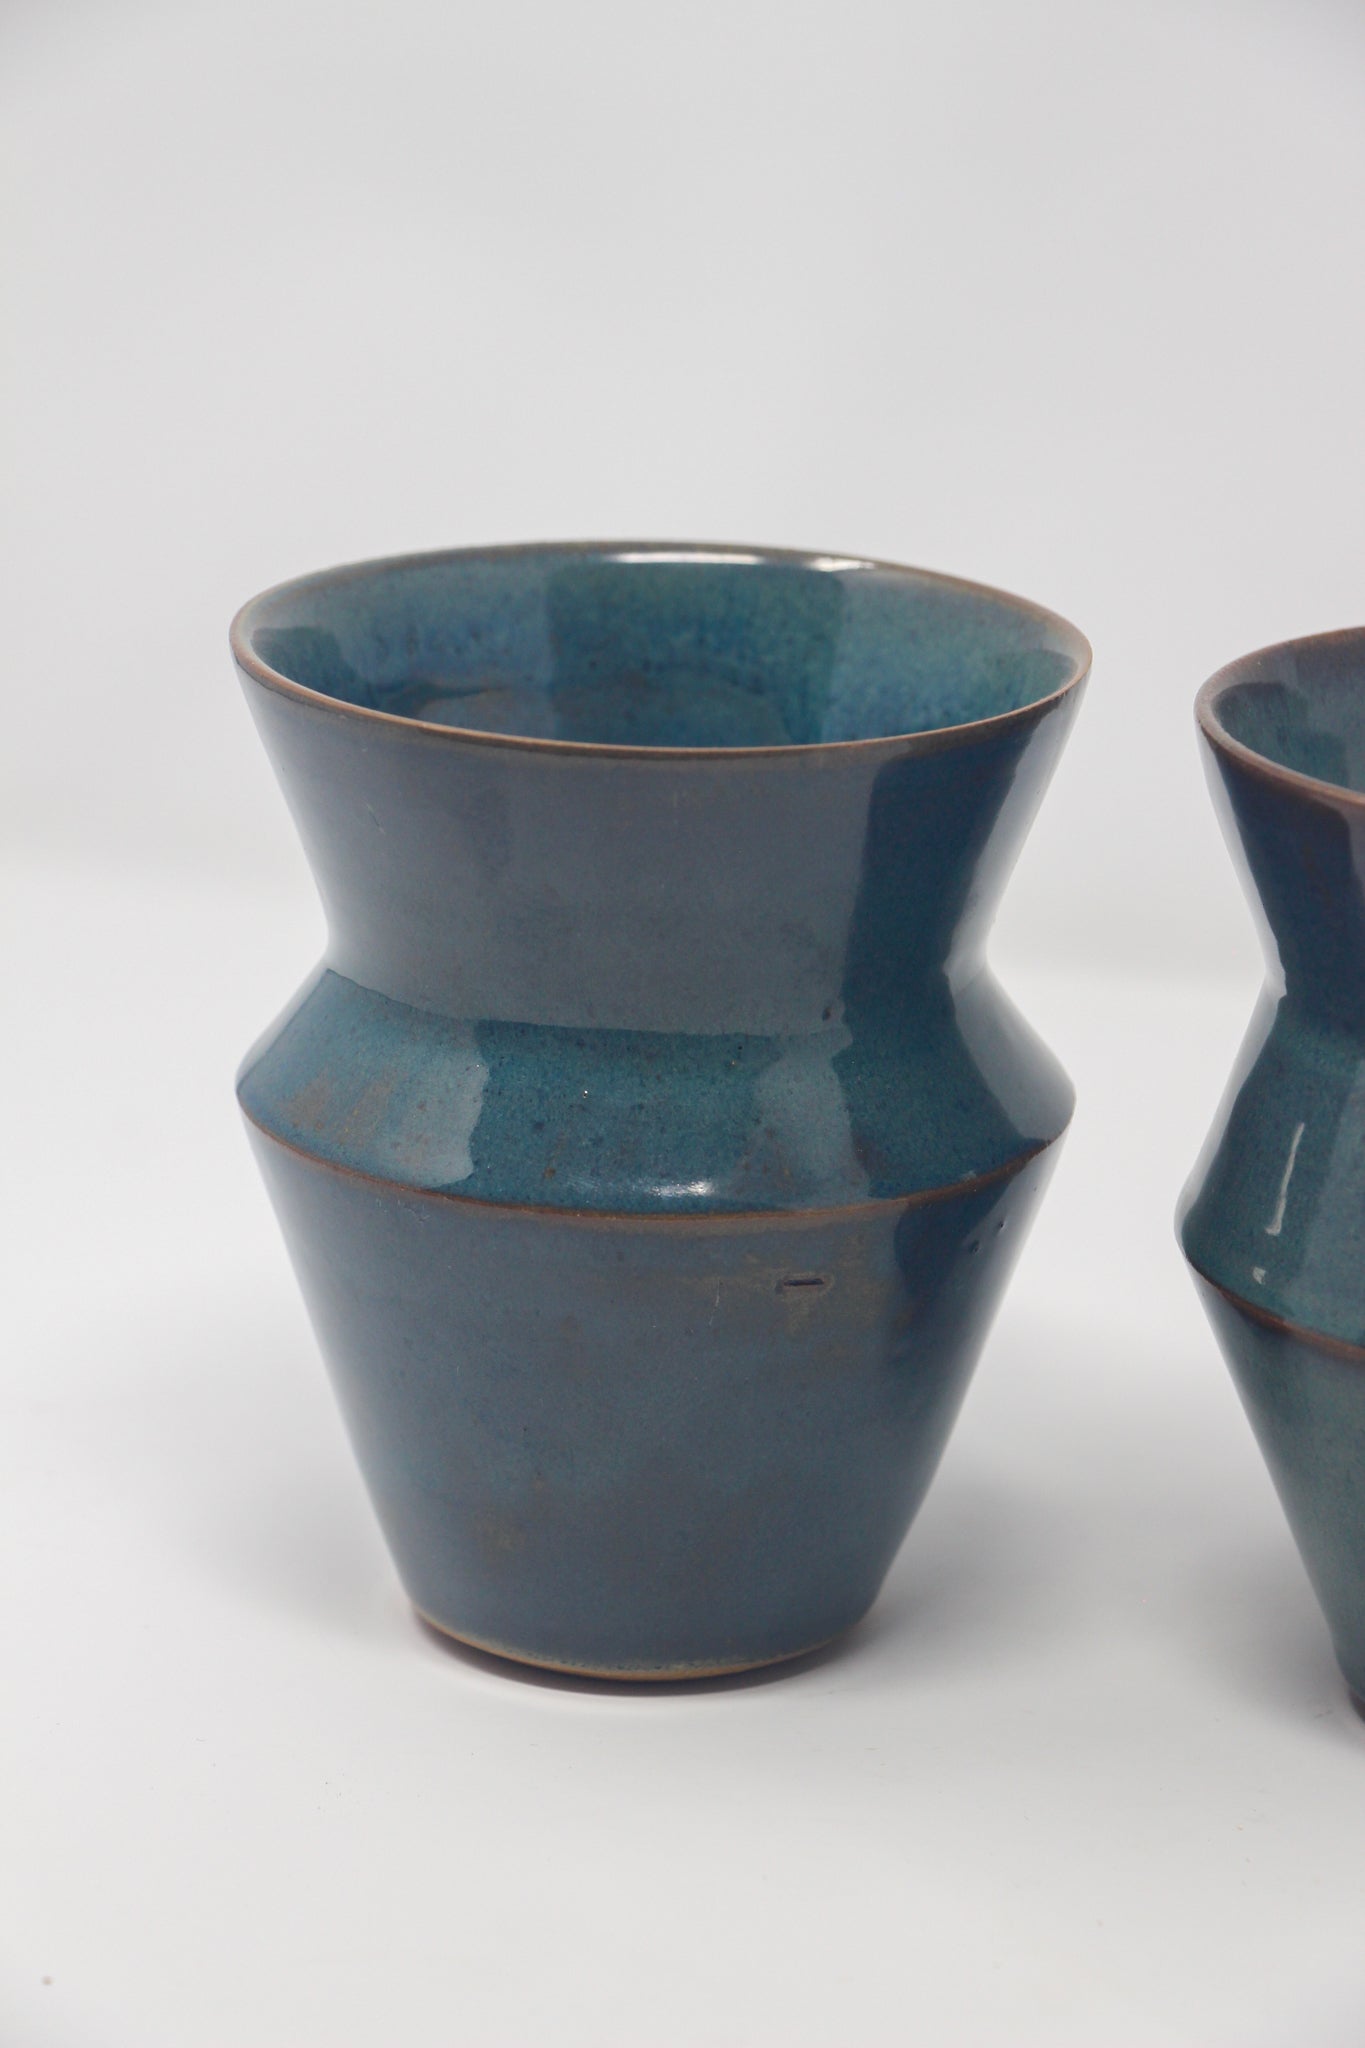 Pair of Small Vases, Coppernican Sky